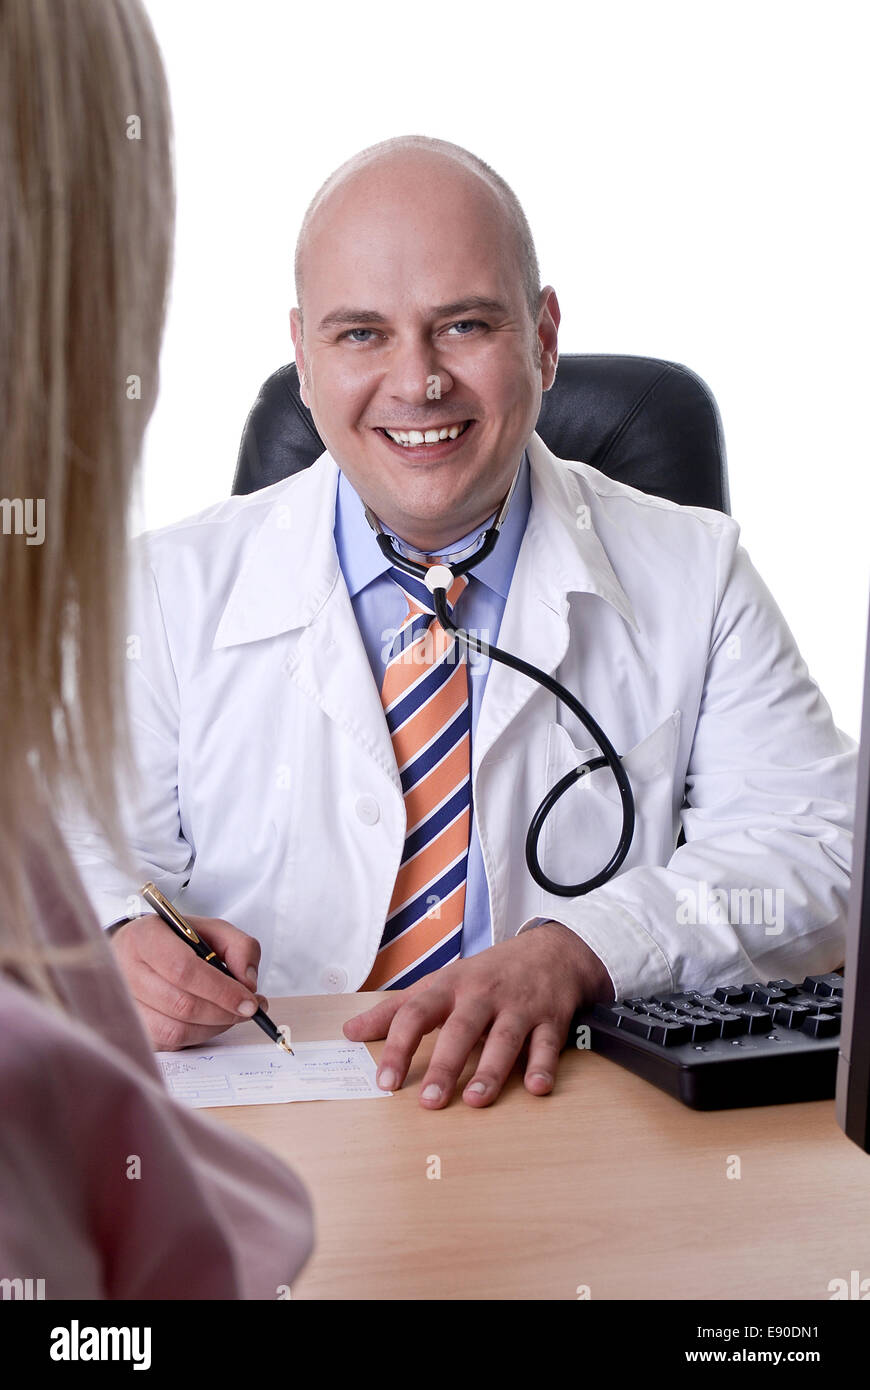 The doctor patient consultation Stock Photo